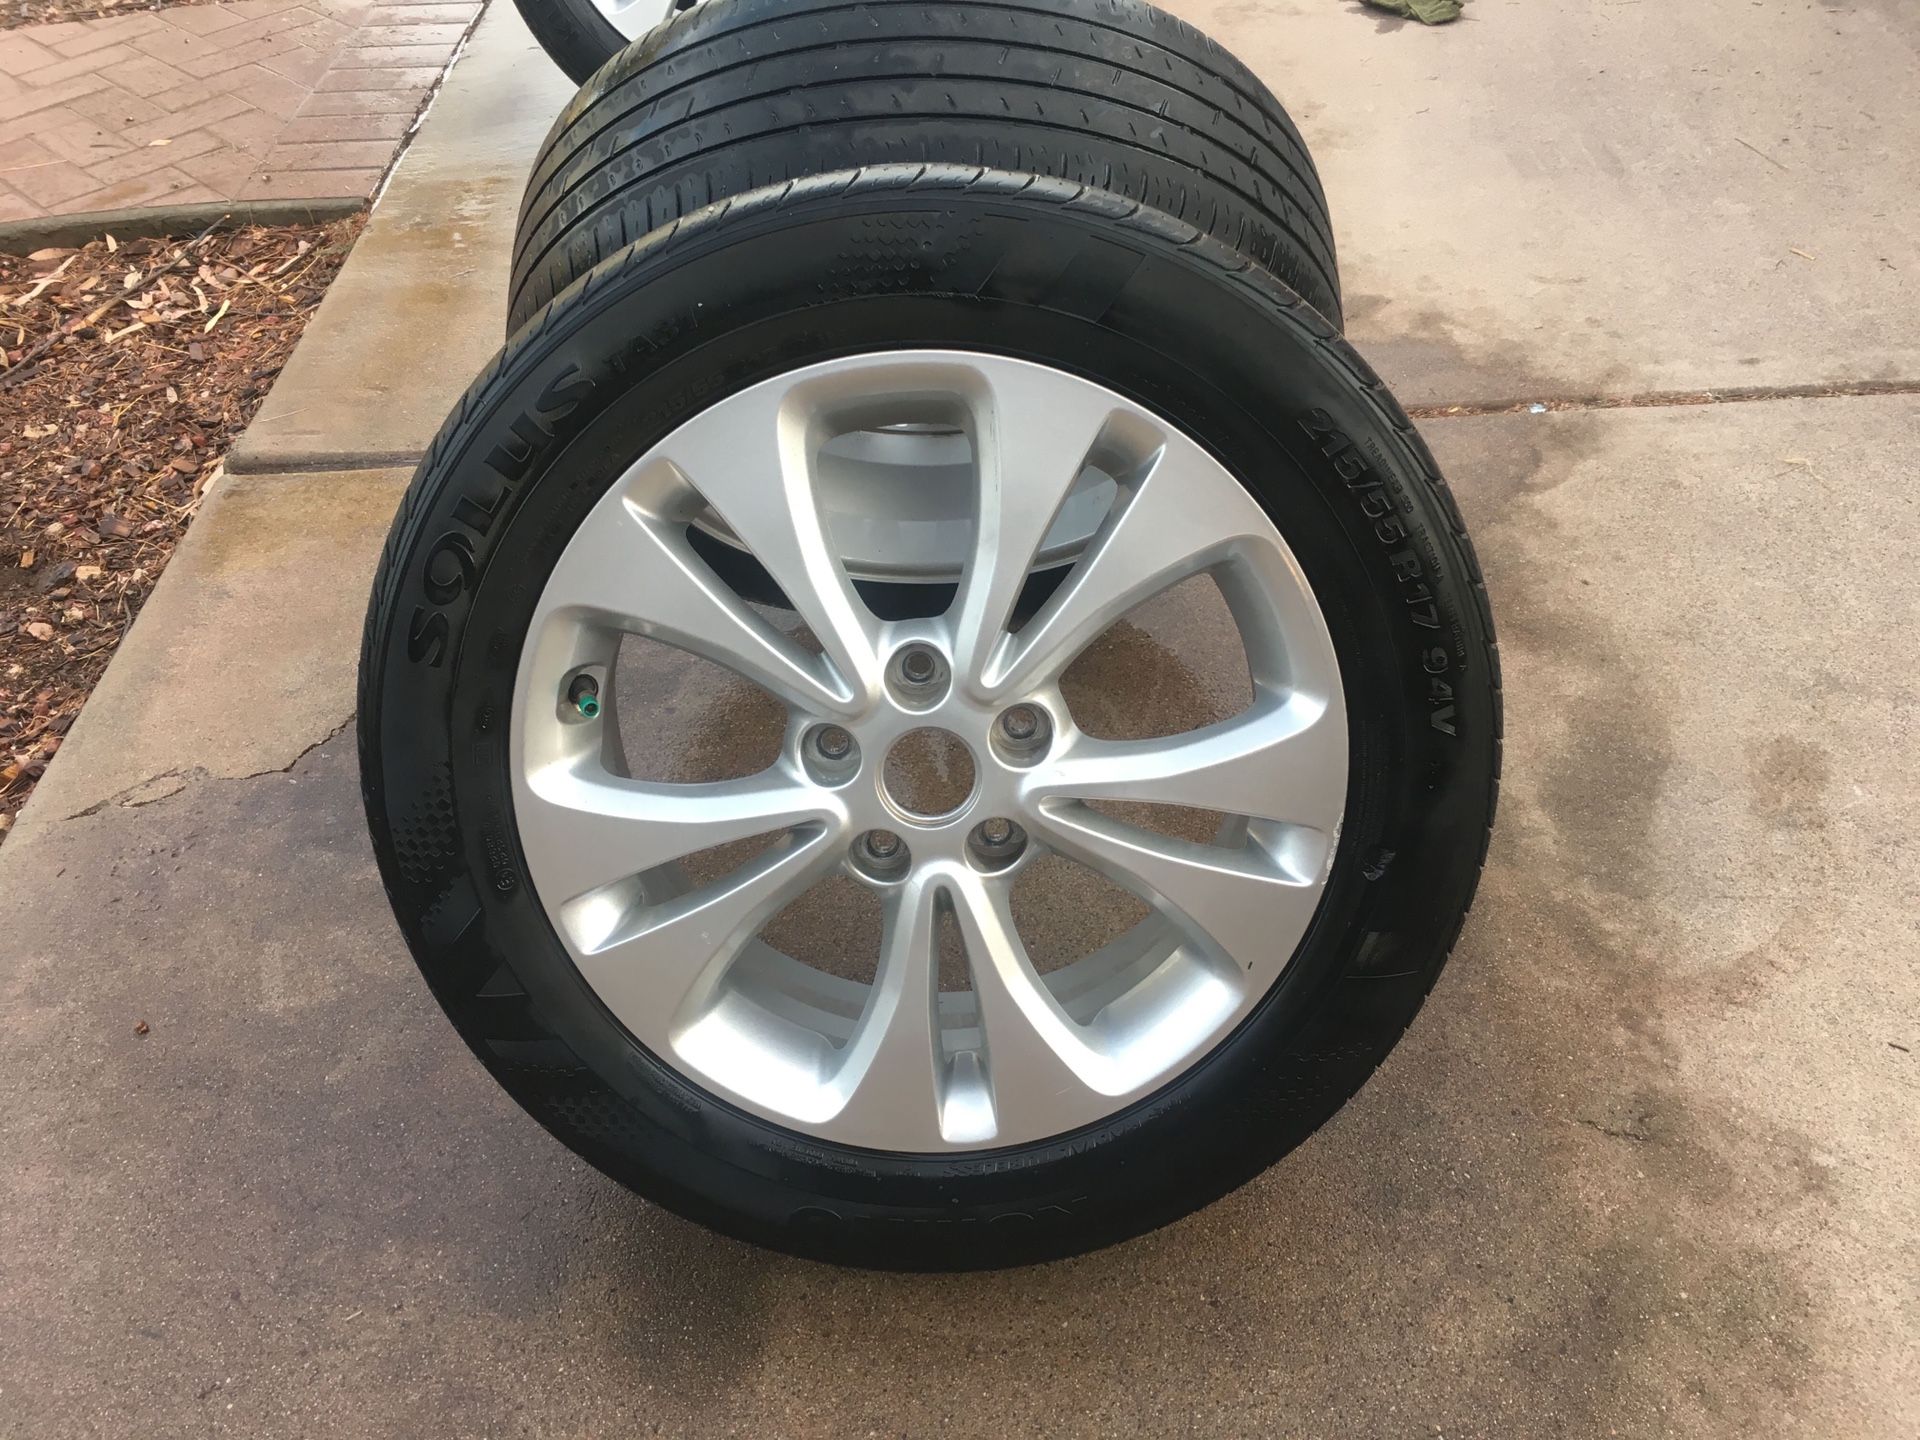 2016 Kia Soul wheels and tires / spare tire 215/55 R17